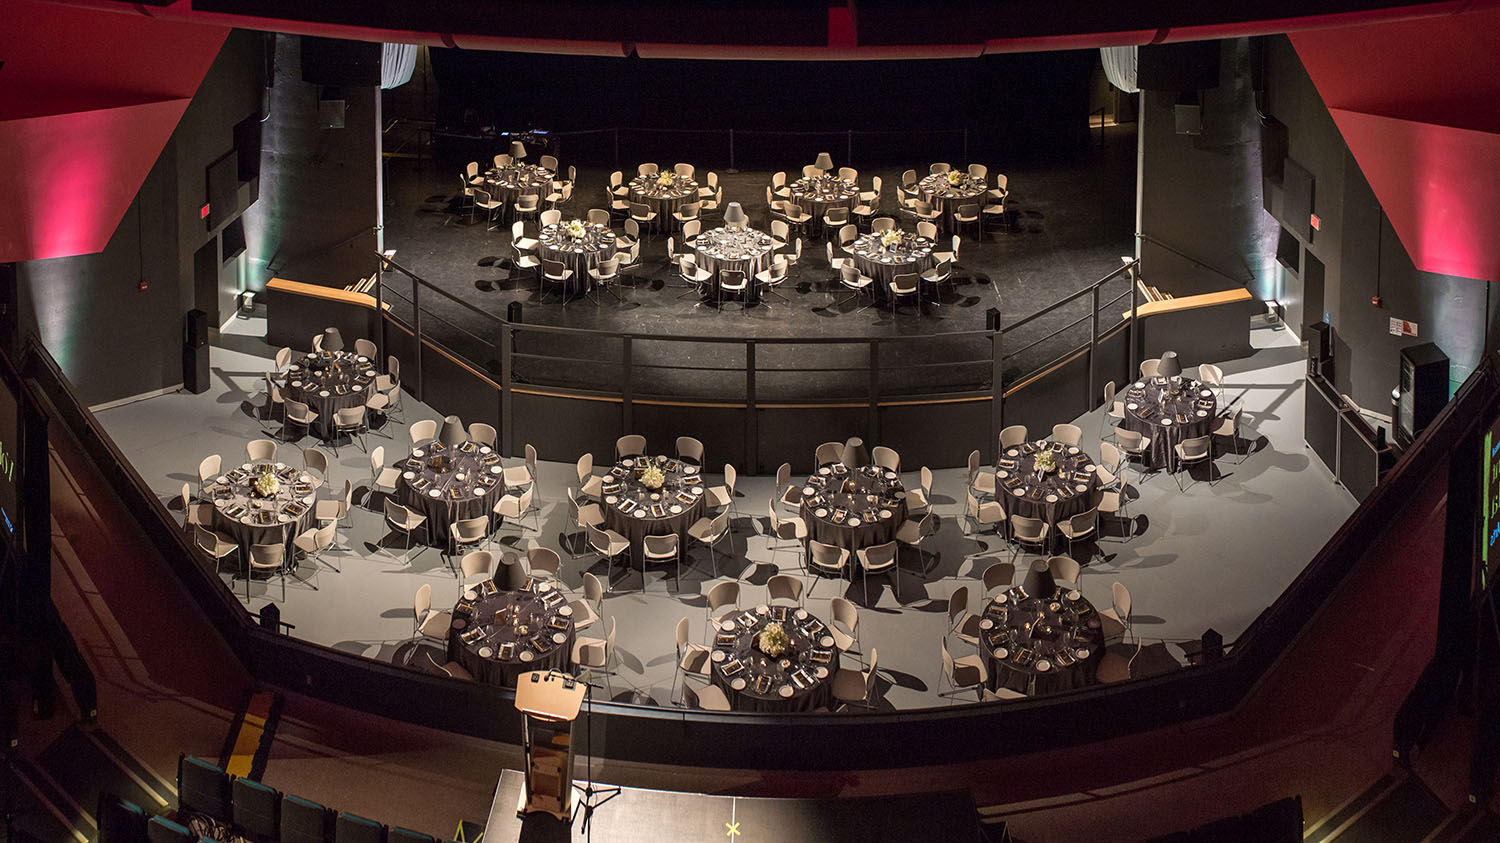 Gala layout, with tables and chairs onstage and on the Floor Level. Podium is on the Main Level.